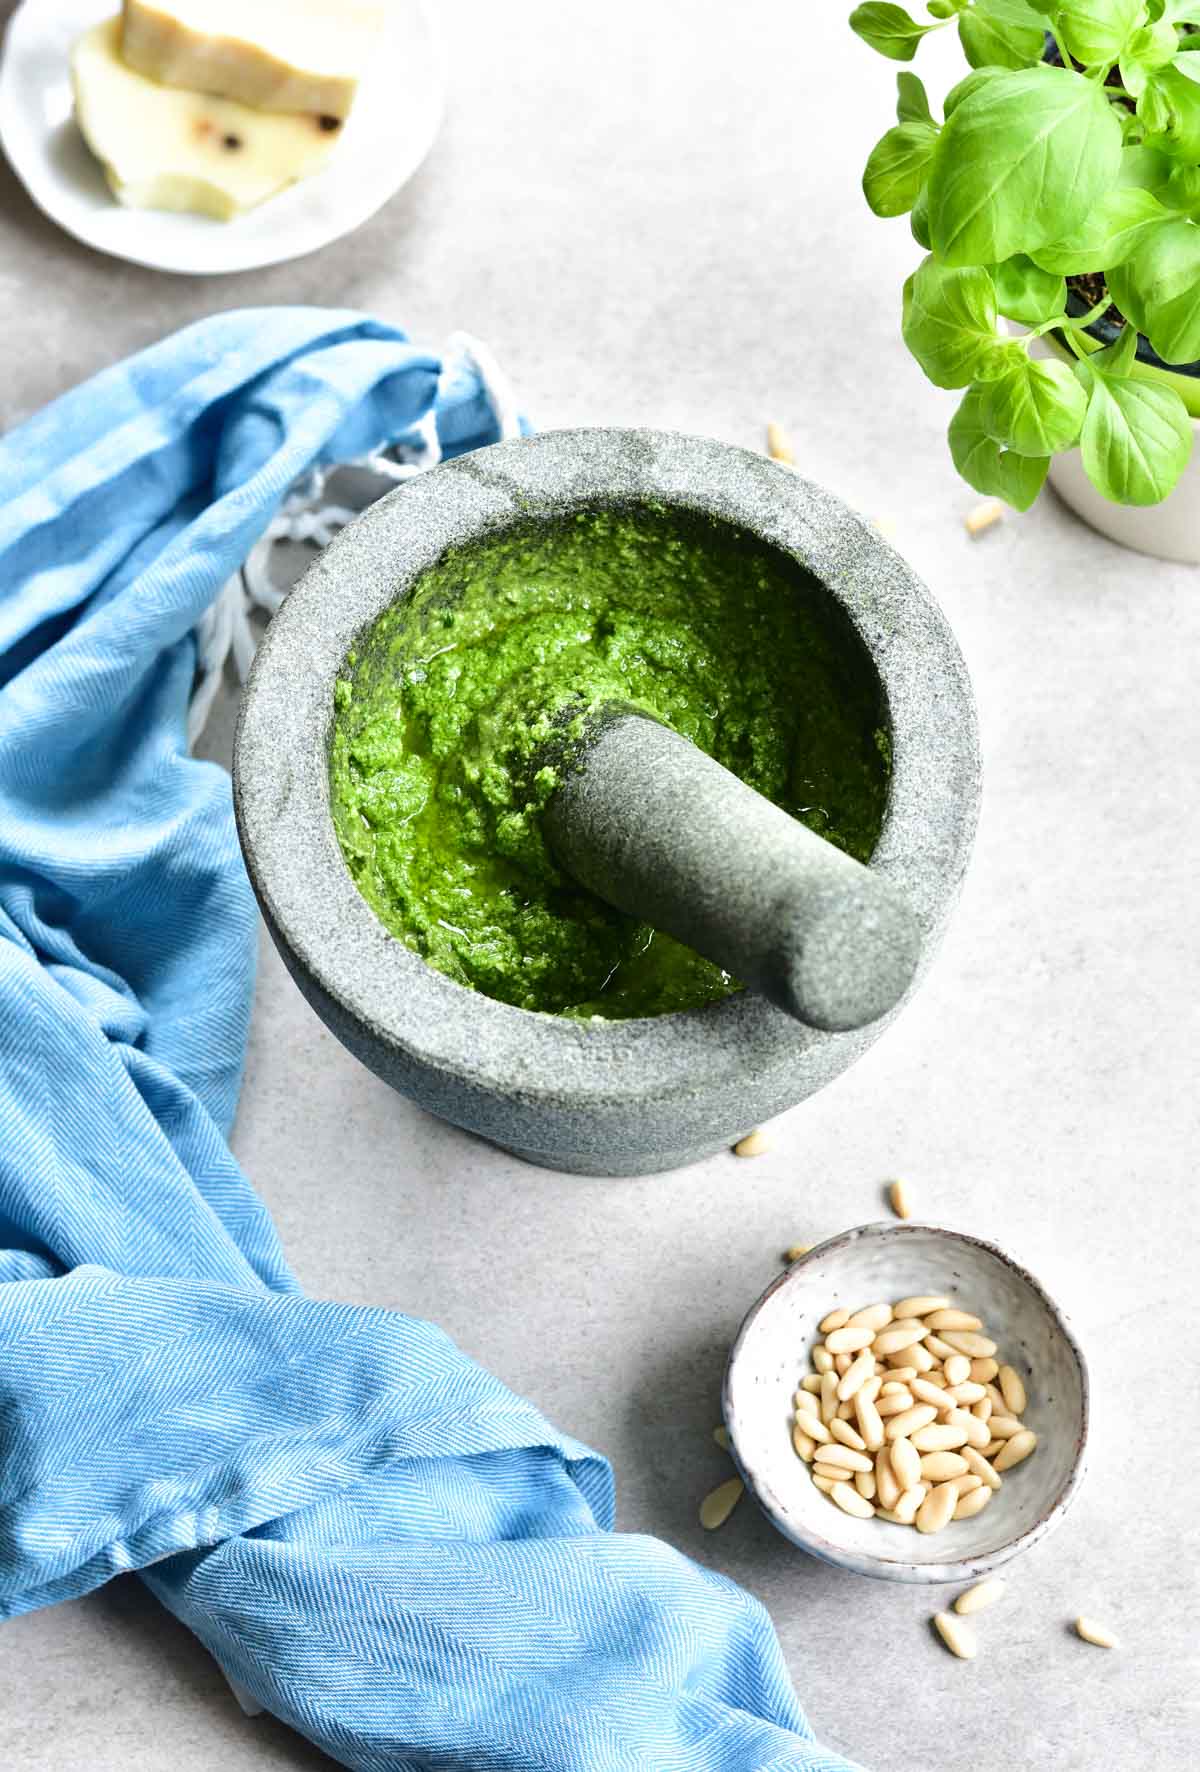 Basil pesto in a granite mortar. Kitchen cloth and pine nuts in the background.